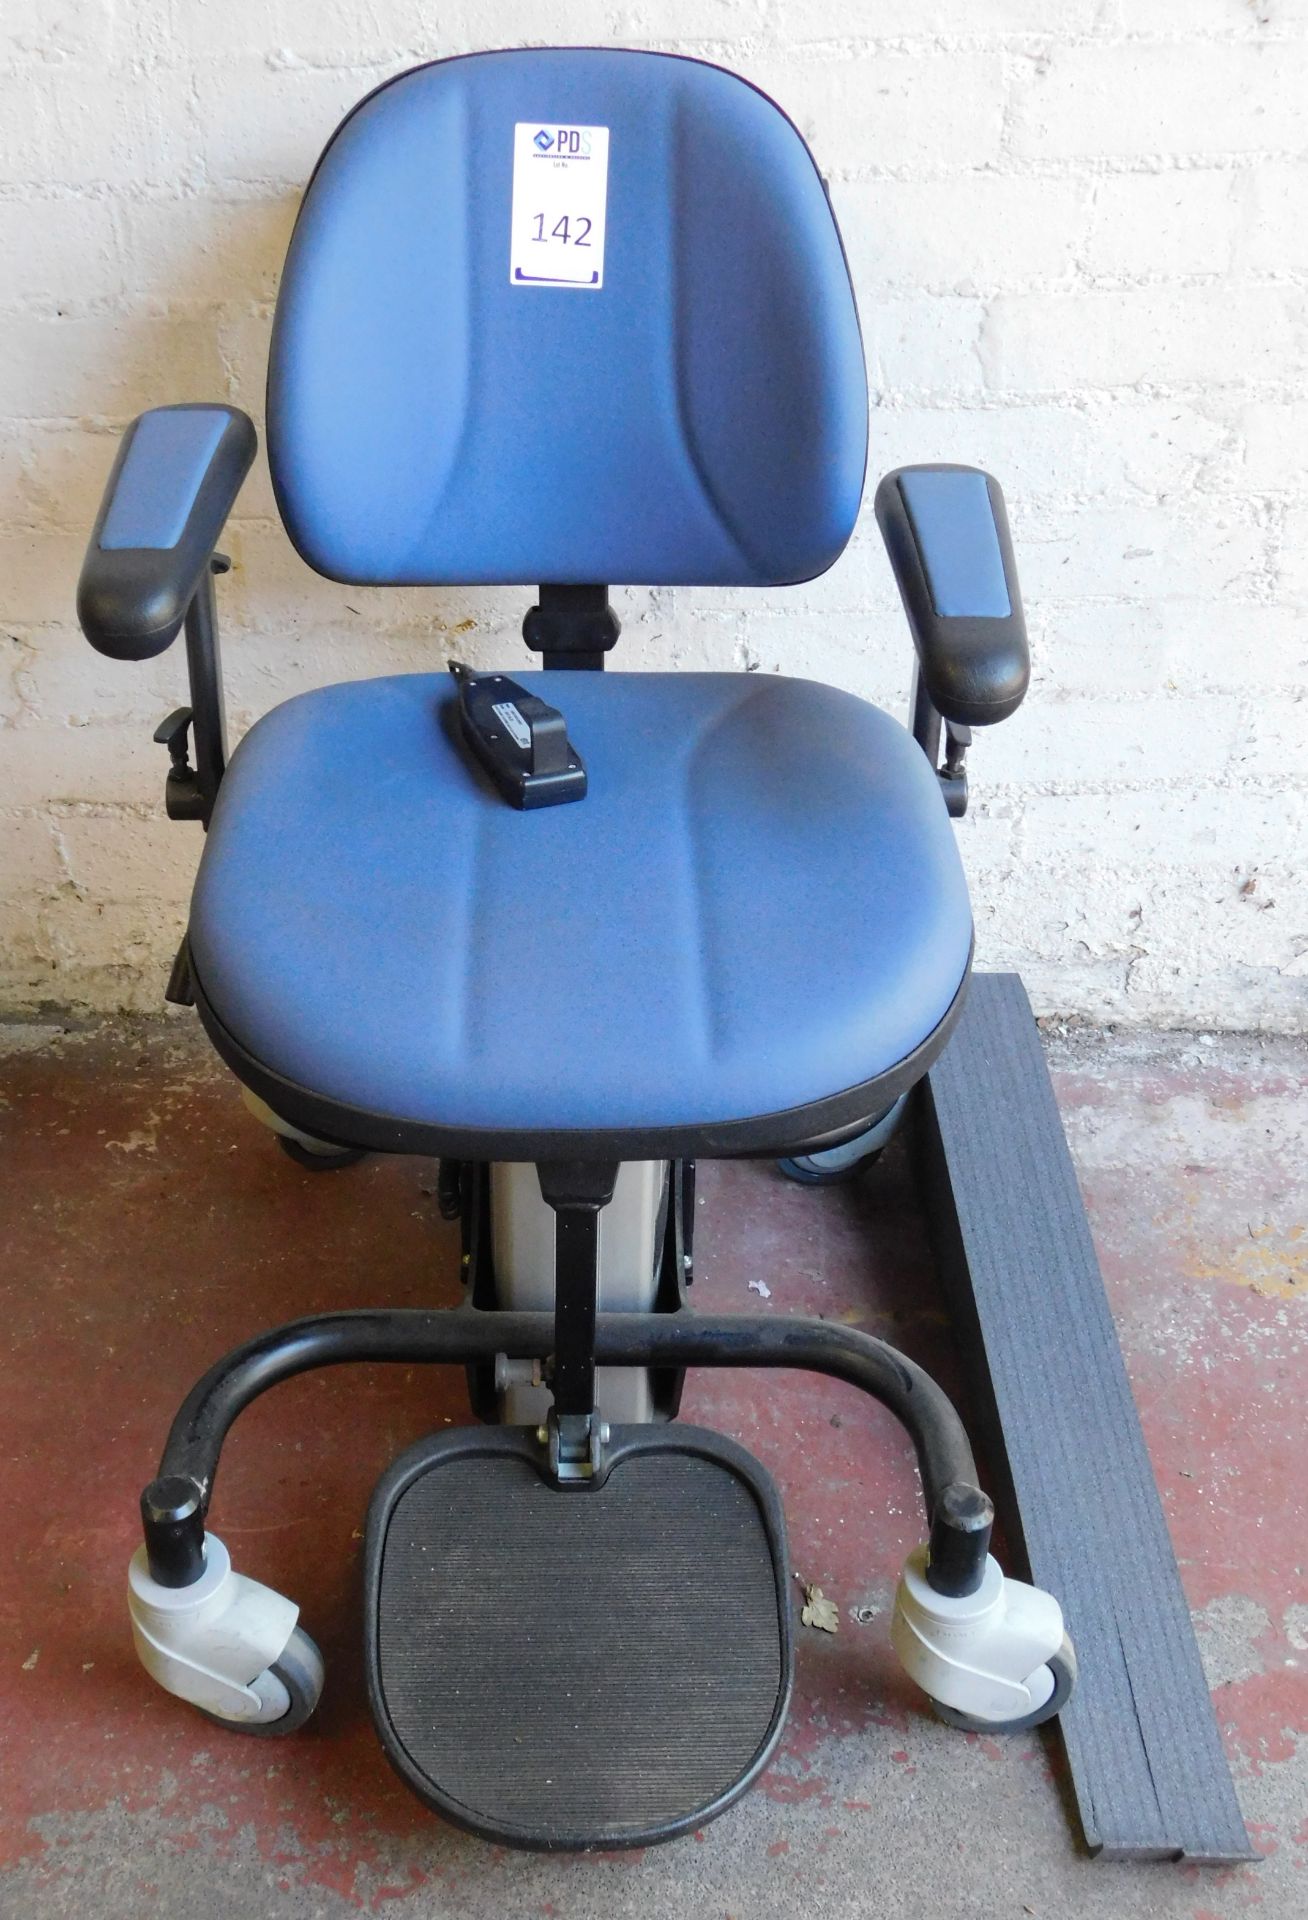 Rini HB41A00-00002 Ophthalmic Operating Chair, Serial Number 173-06 (Location: Bushey. Please